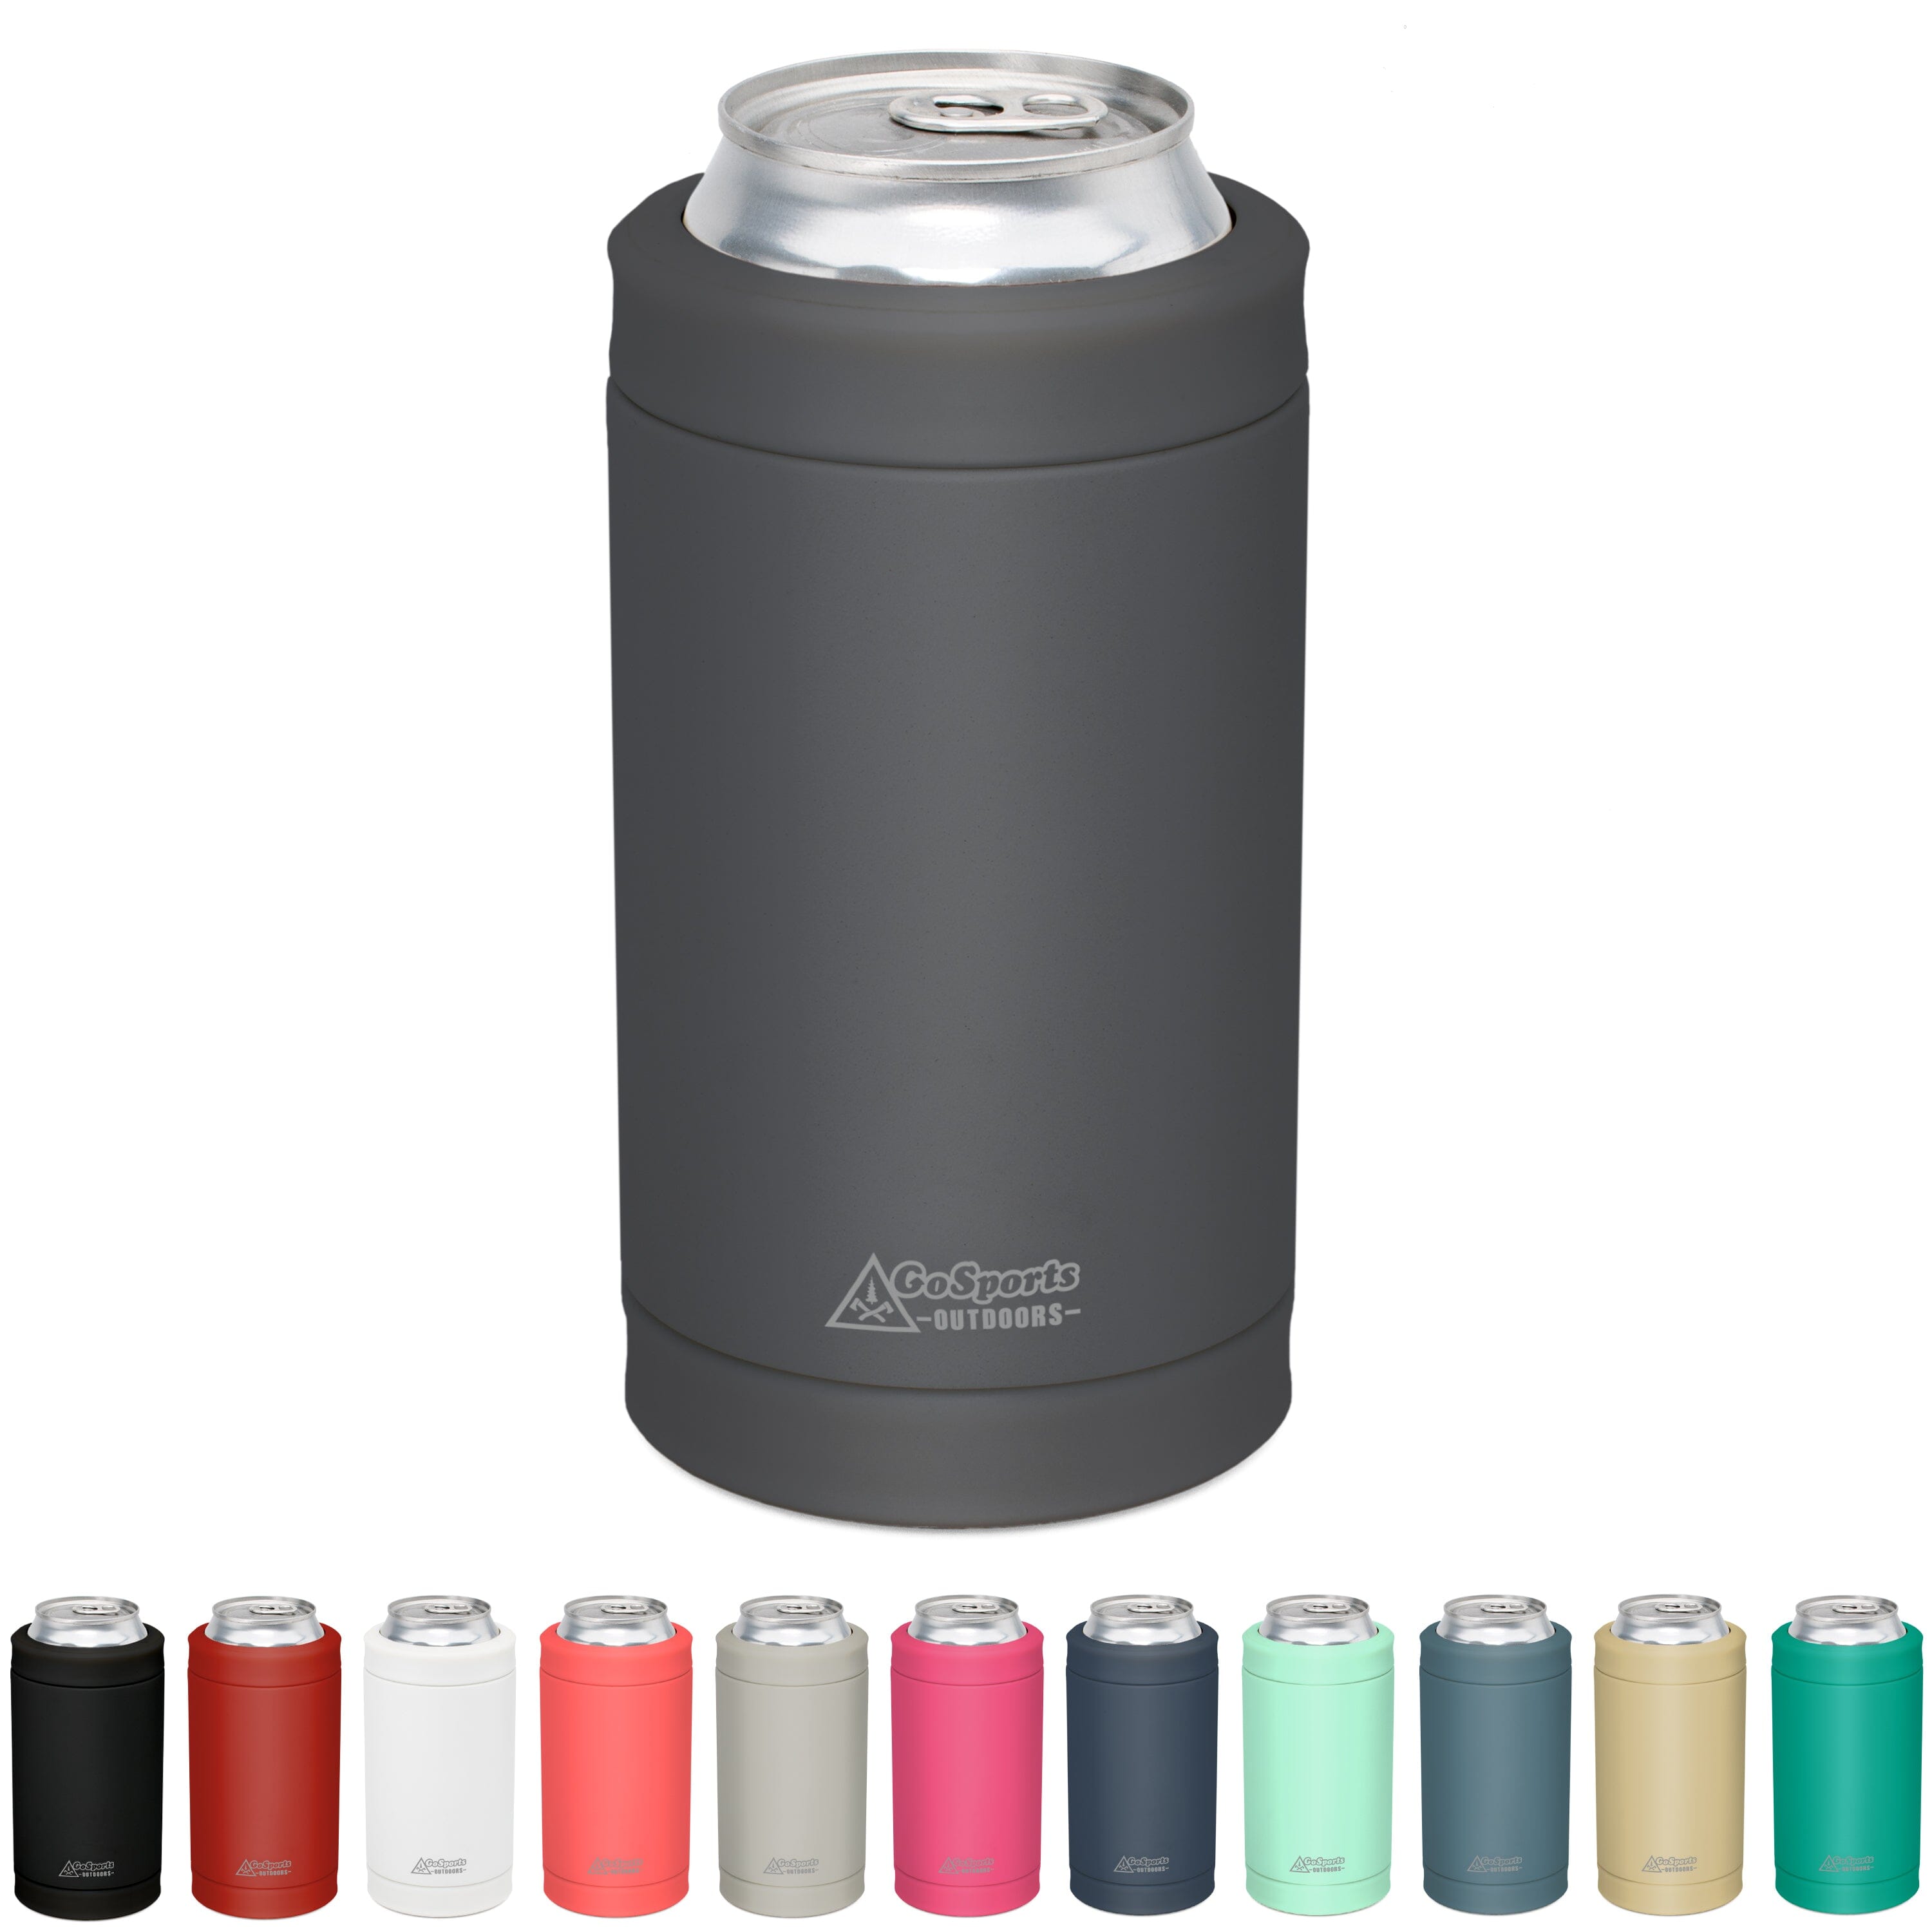 DUALIE 3 in 1 Insulated Can Cooler Universal Size for 12 oz Cans